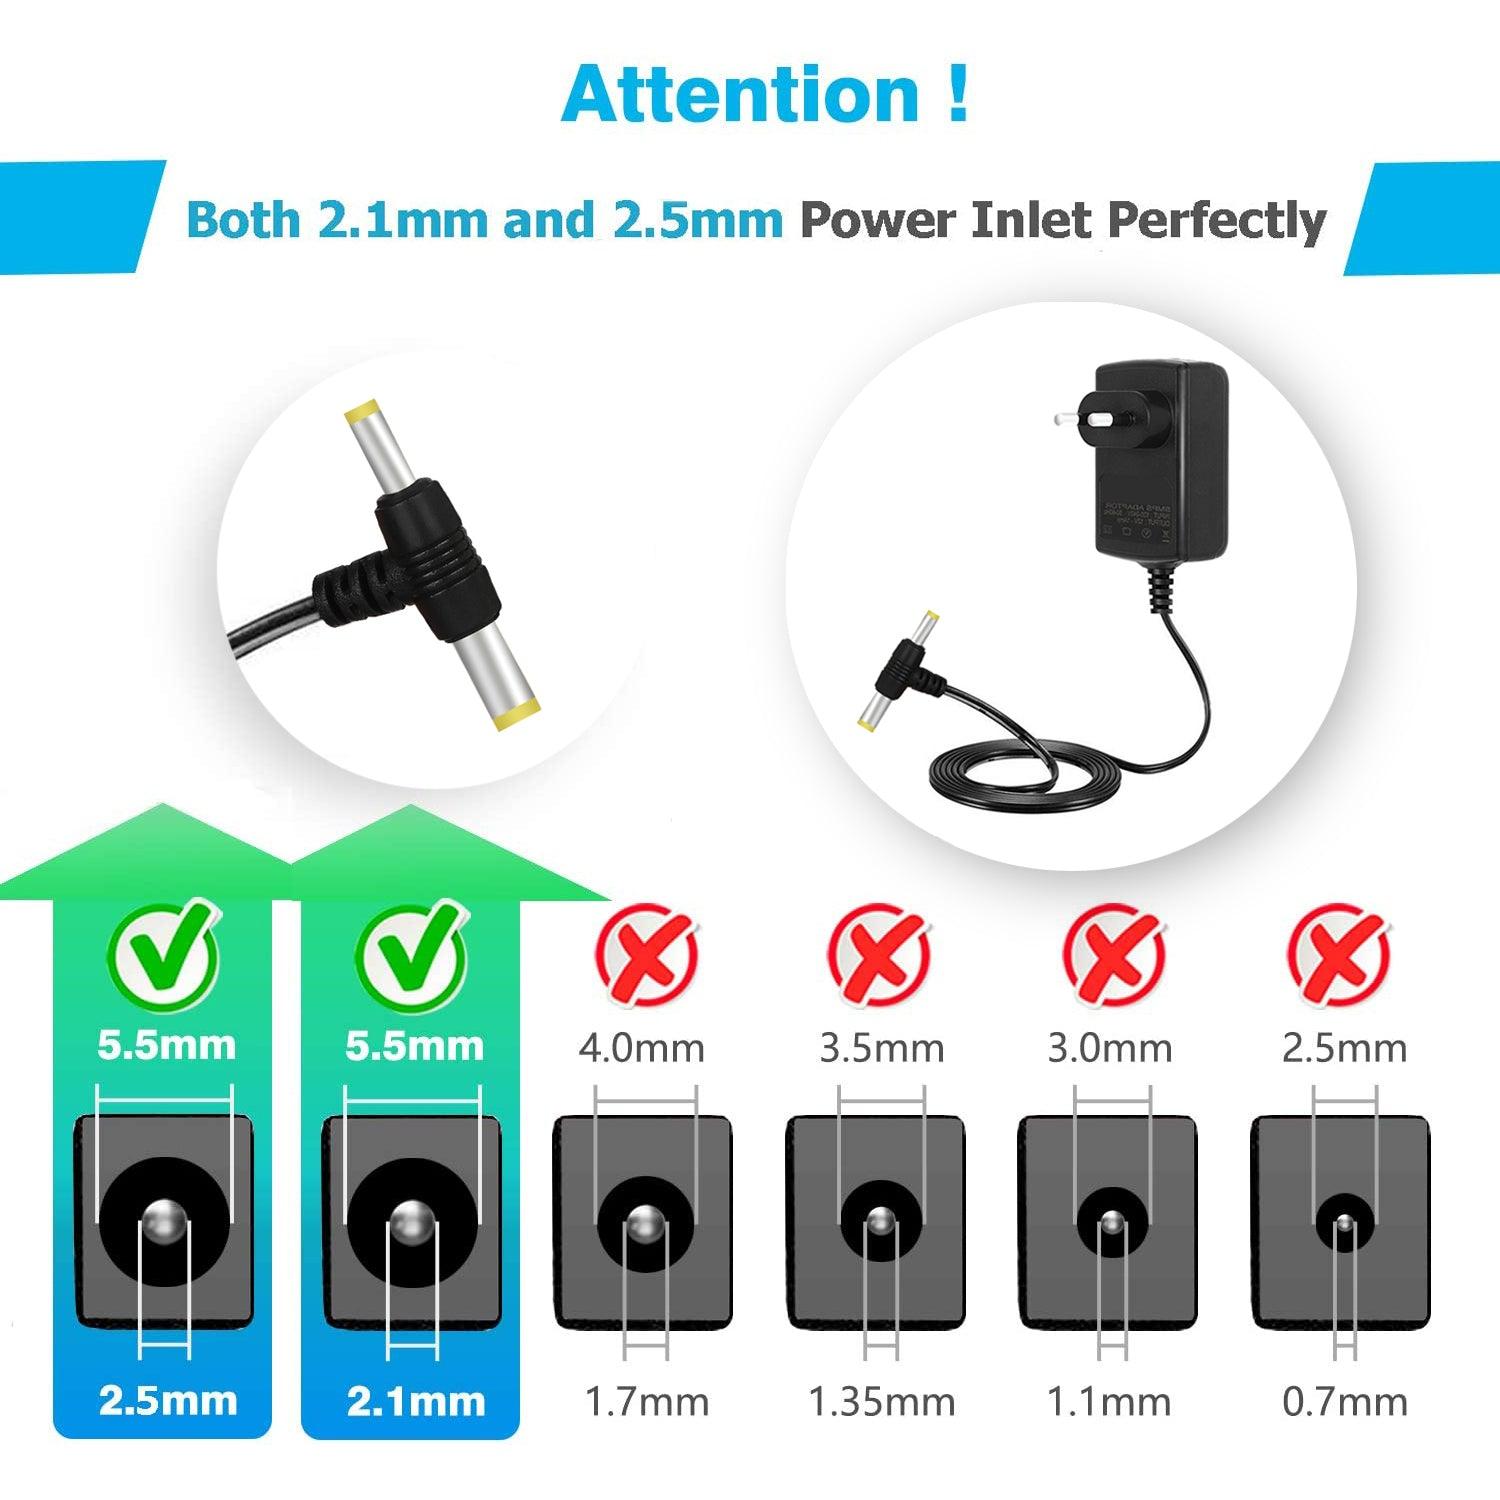 FEDUS 12V 2A DC Power Adapter, Powers Supply, SMPS for LCD Monitor, TV, LED Strip, CCTV, 12 Volt 2 A Power Adapter, AC Input 100-240V Dc Output 12 Volt 2 A - 2.5mm x 5.5mm Jack, Black - FEDUS